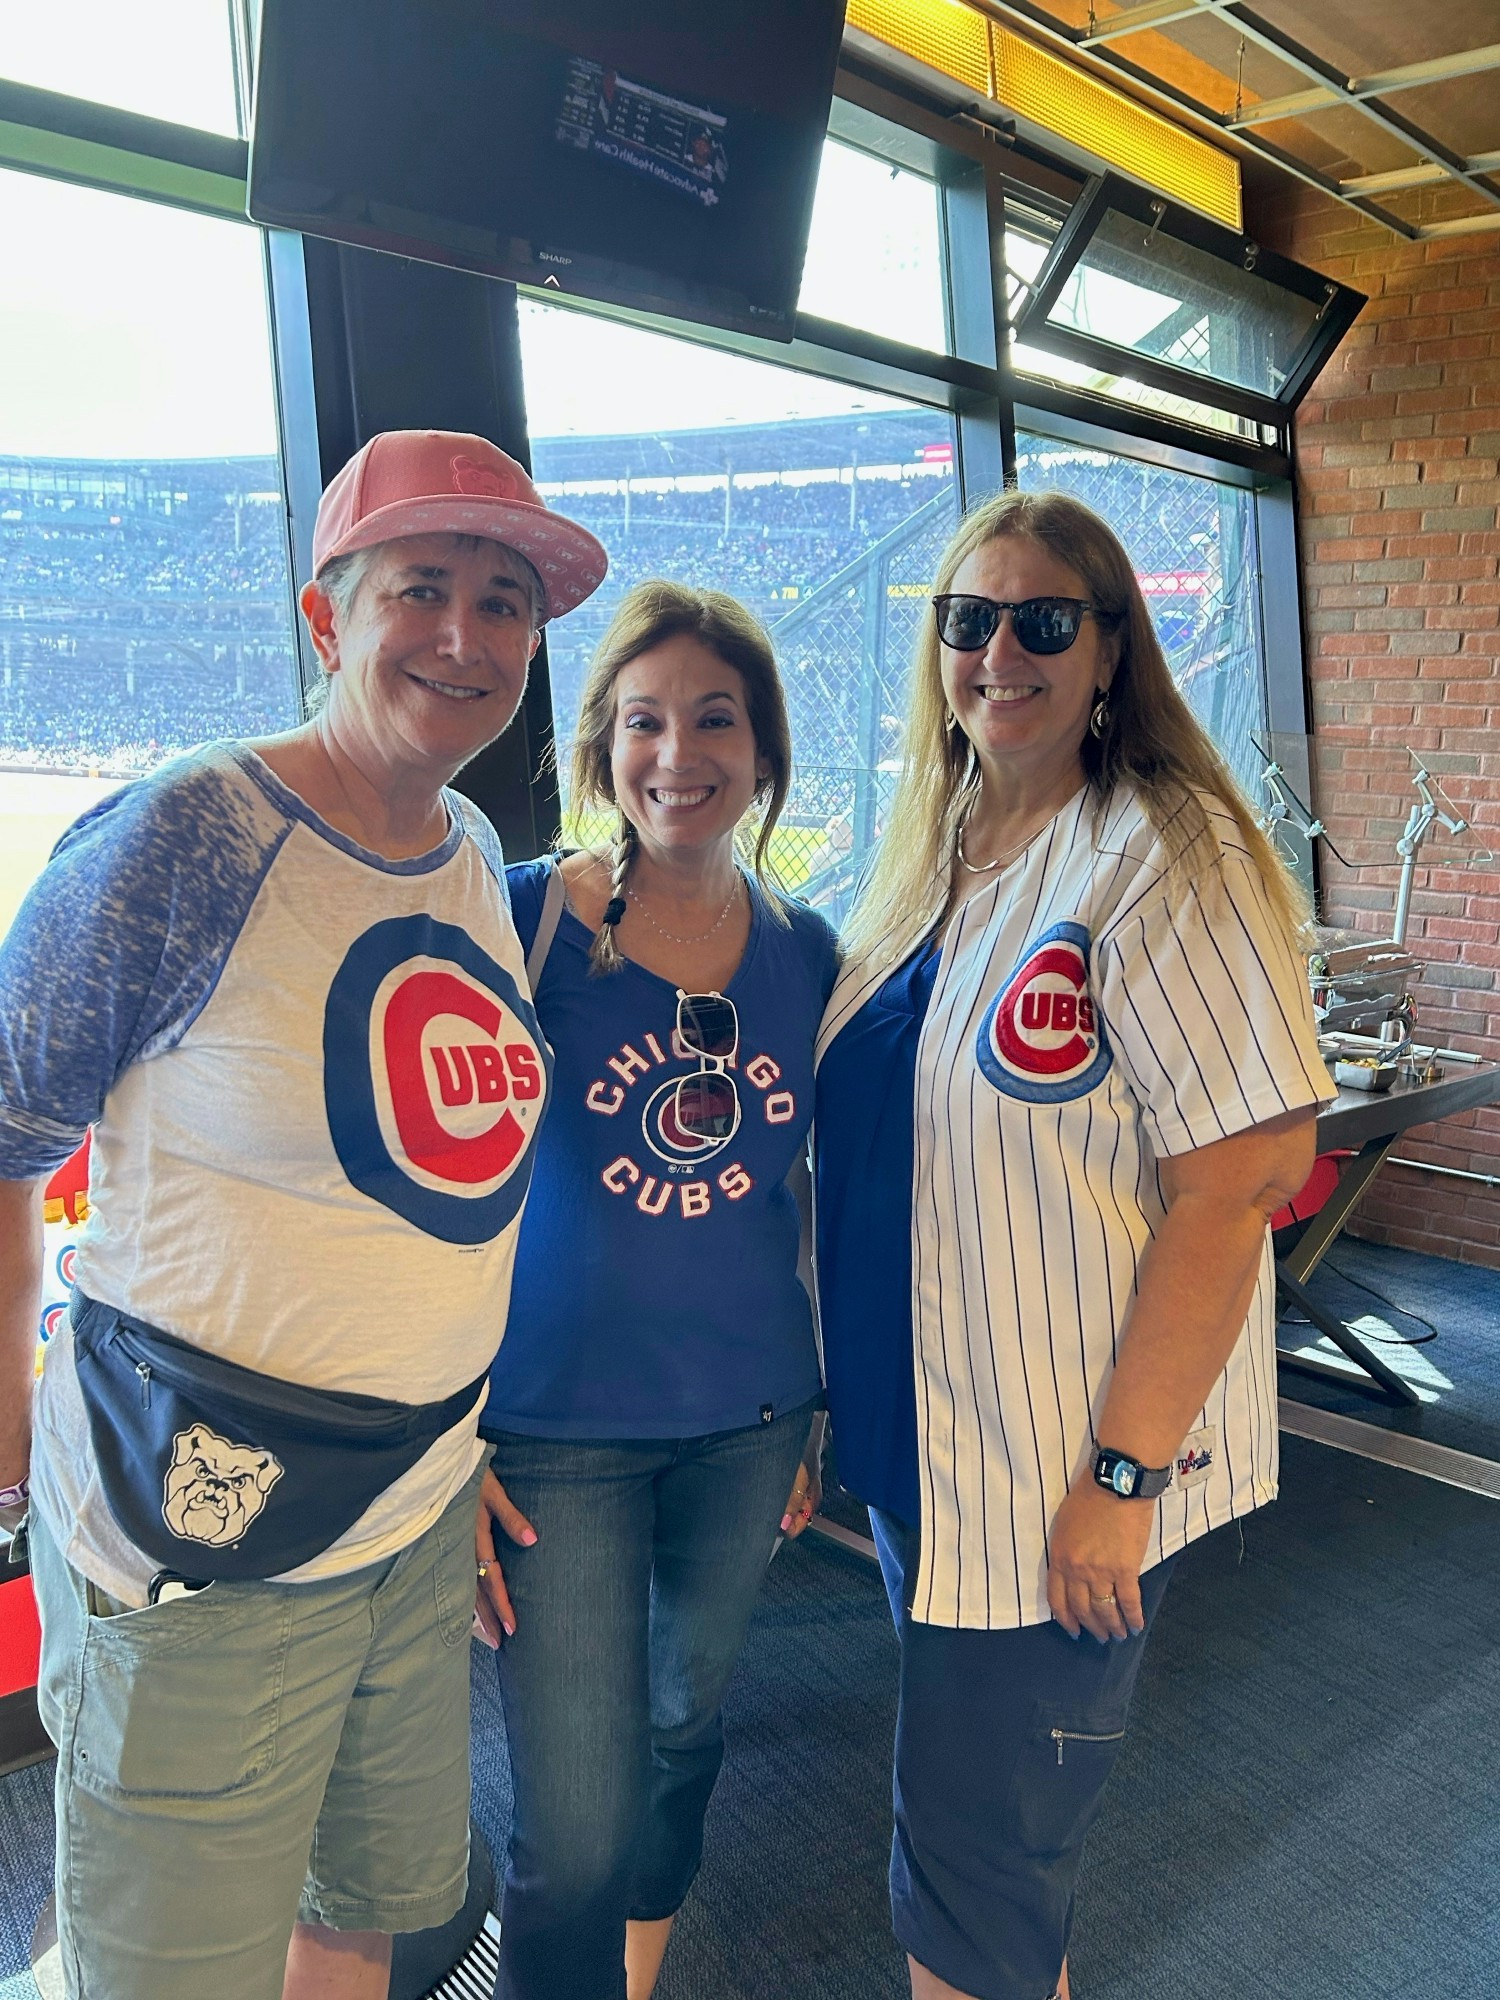 Our Chicago team members enjoying a Cubs game at Wrigley Field.